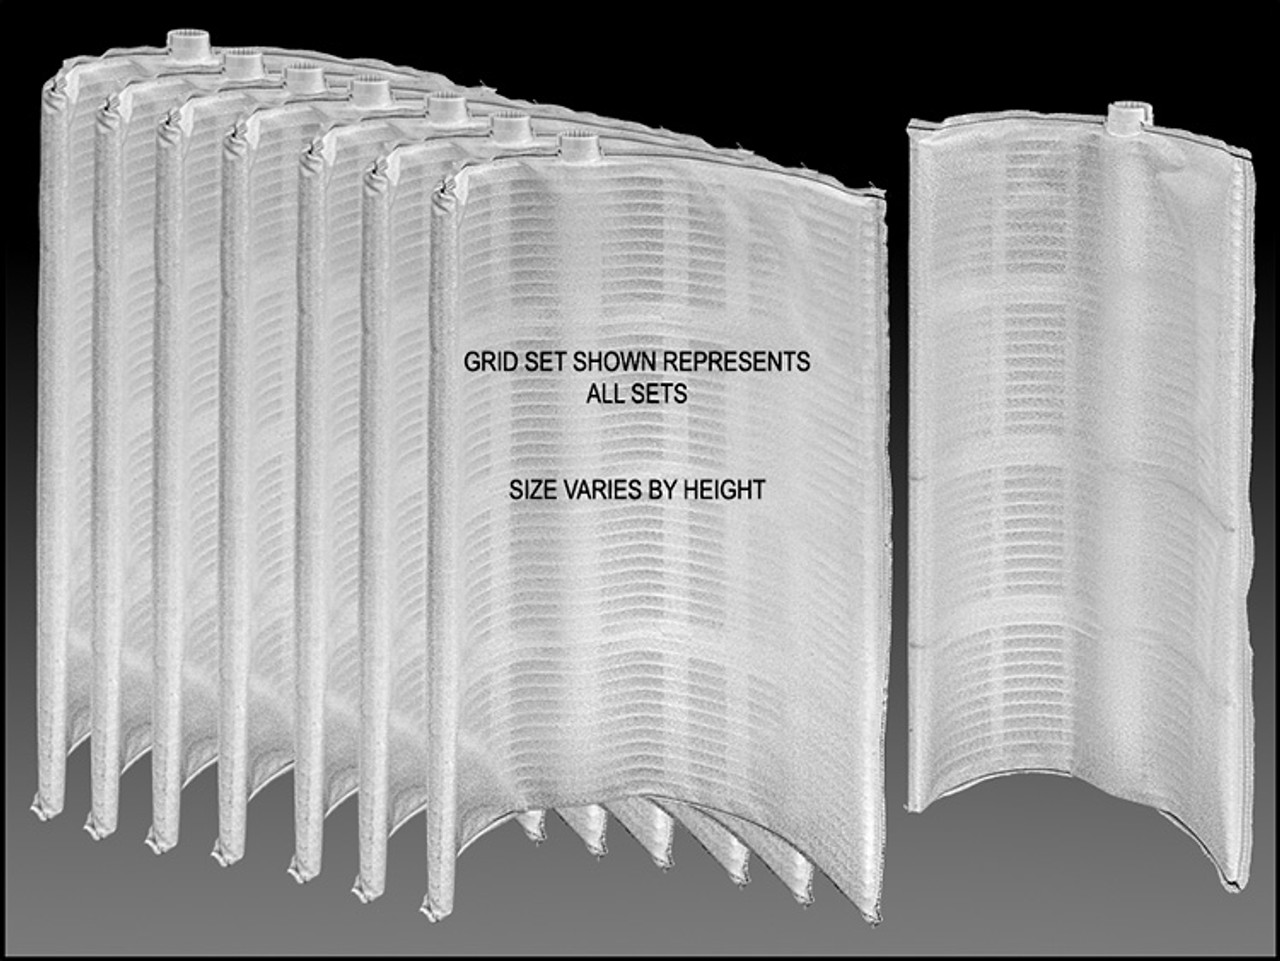 REPLACEMENT GRID SET -24 SQ FT / UNICEL-FS-2002 / AMER / HAYWARD / PAC FAB